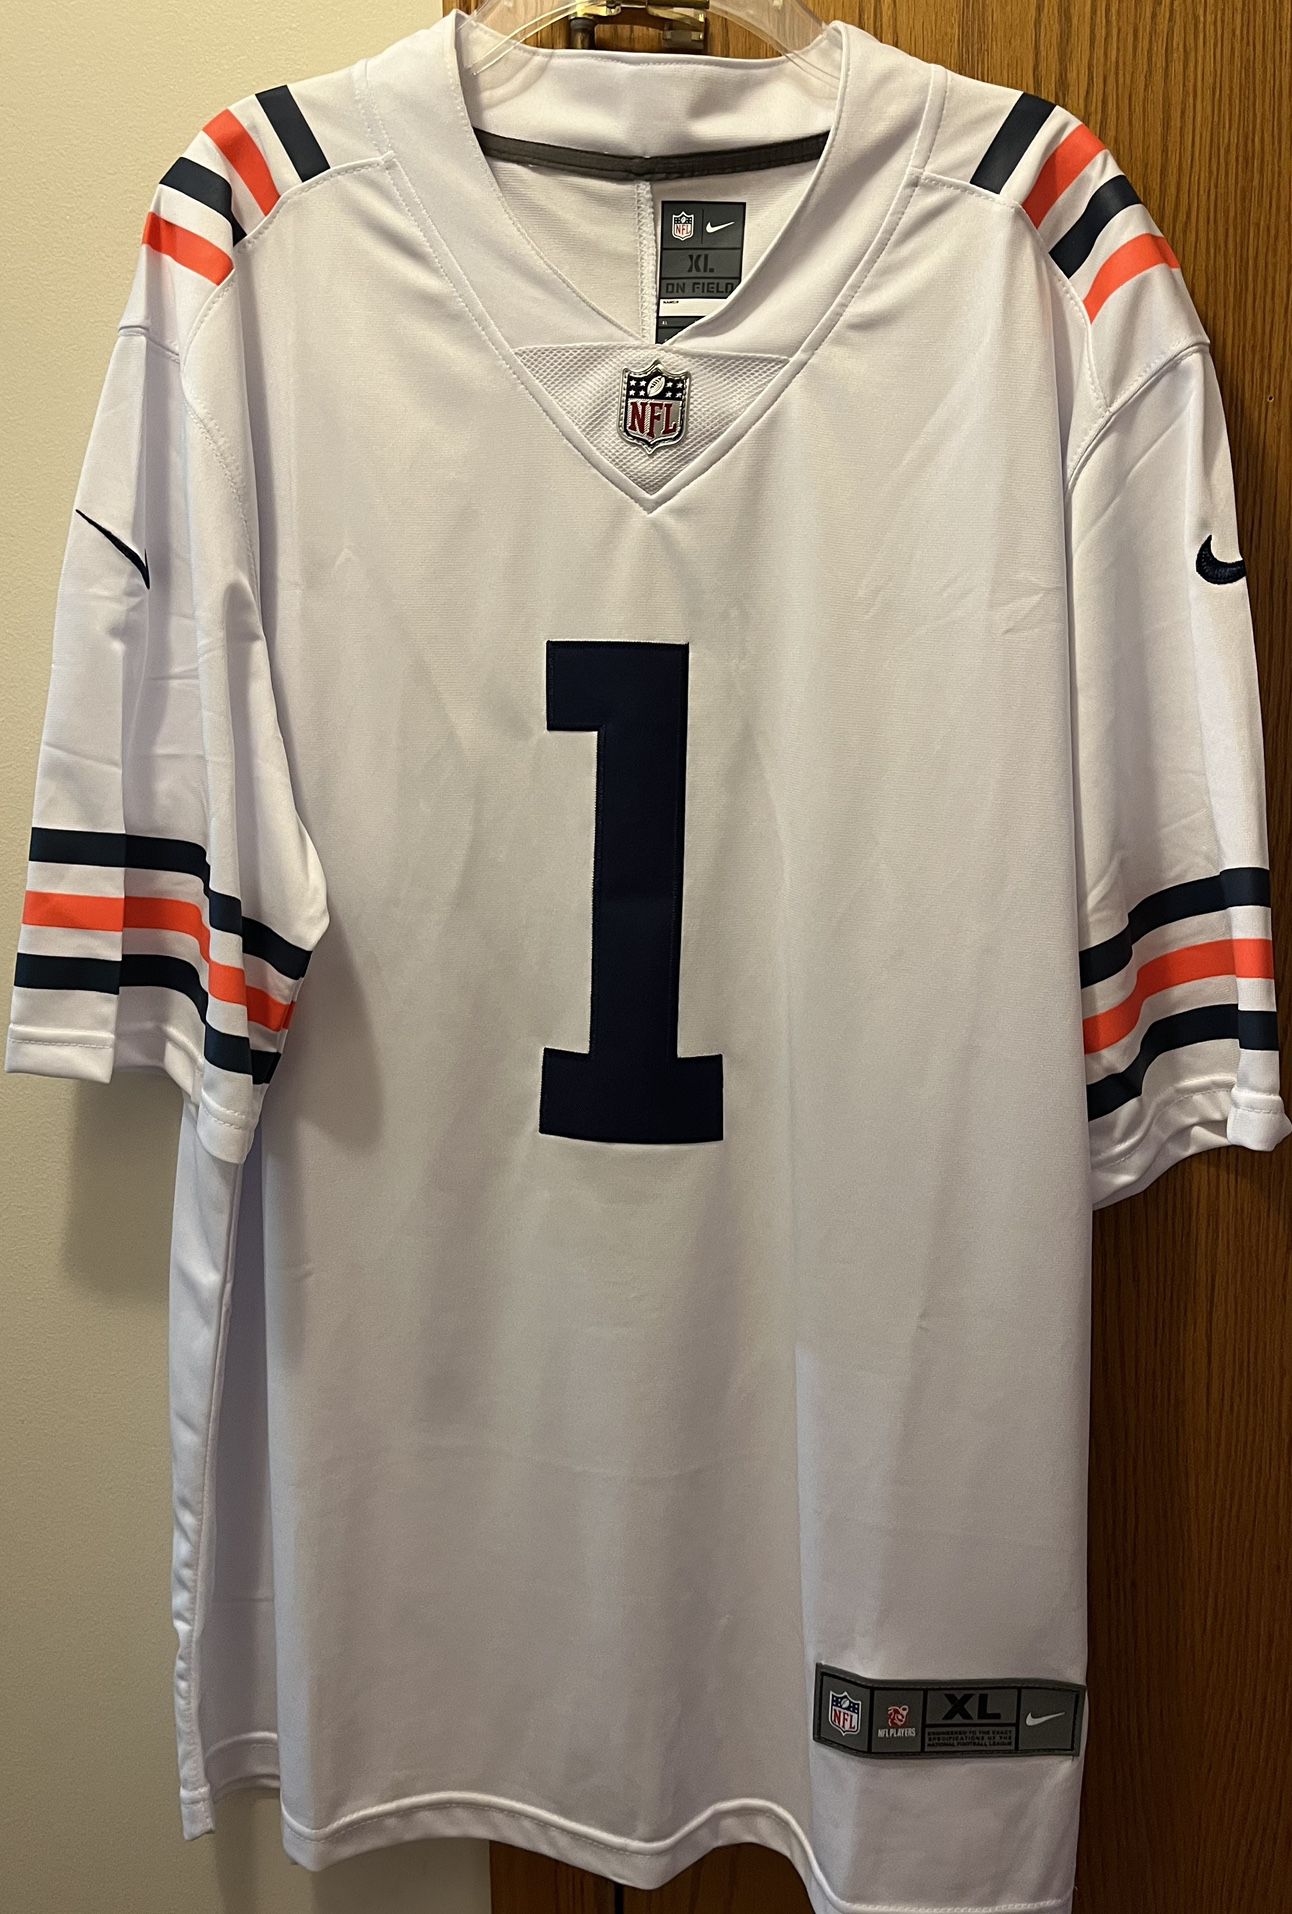 justin fields jersey for sale